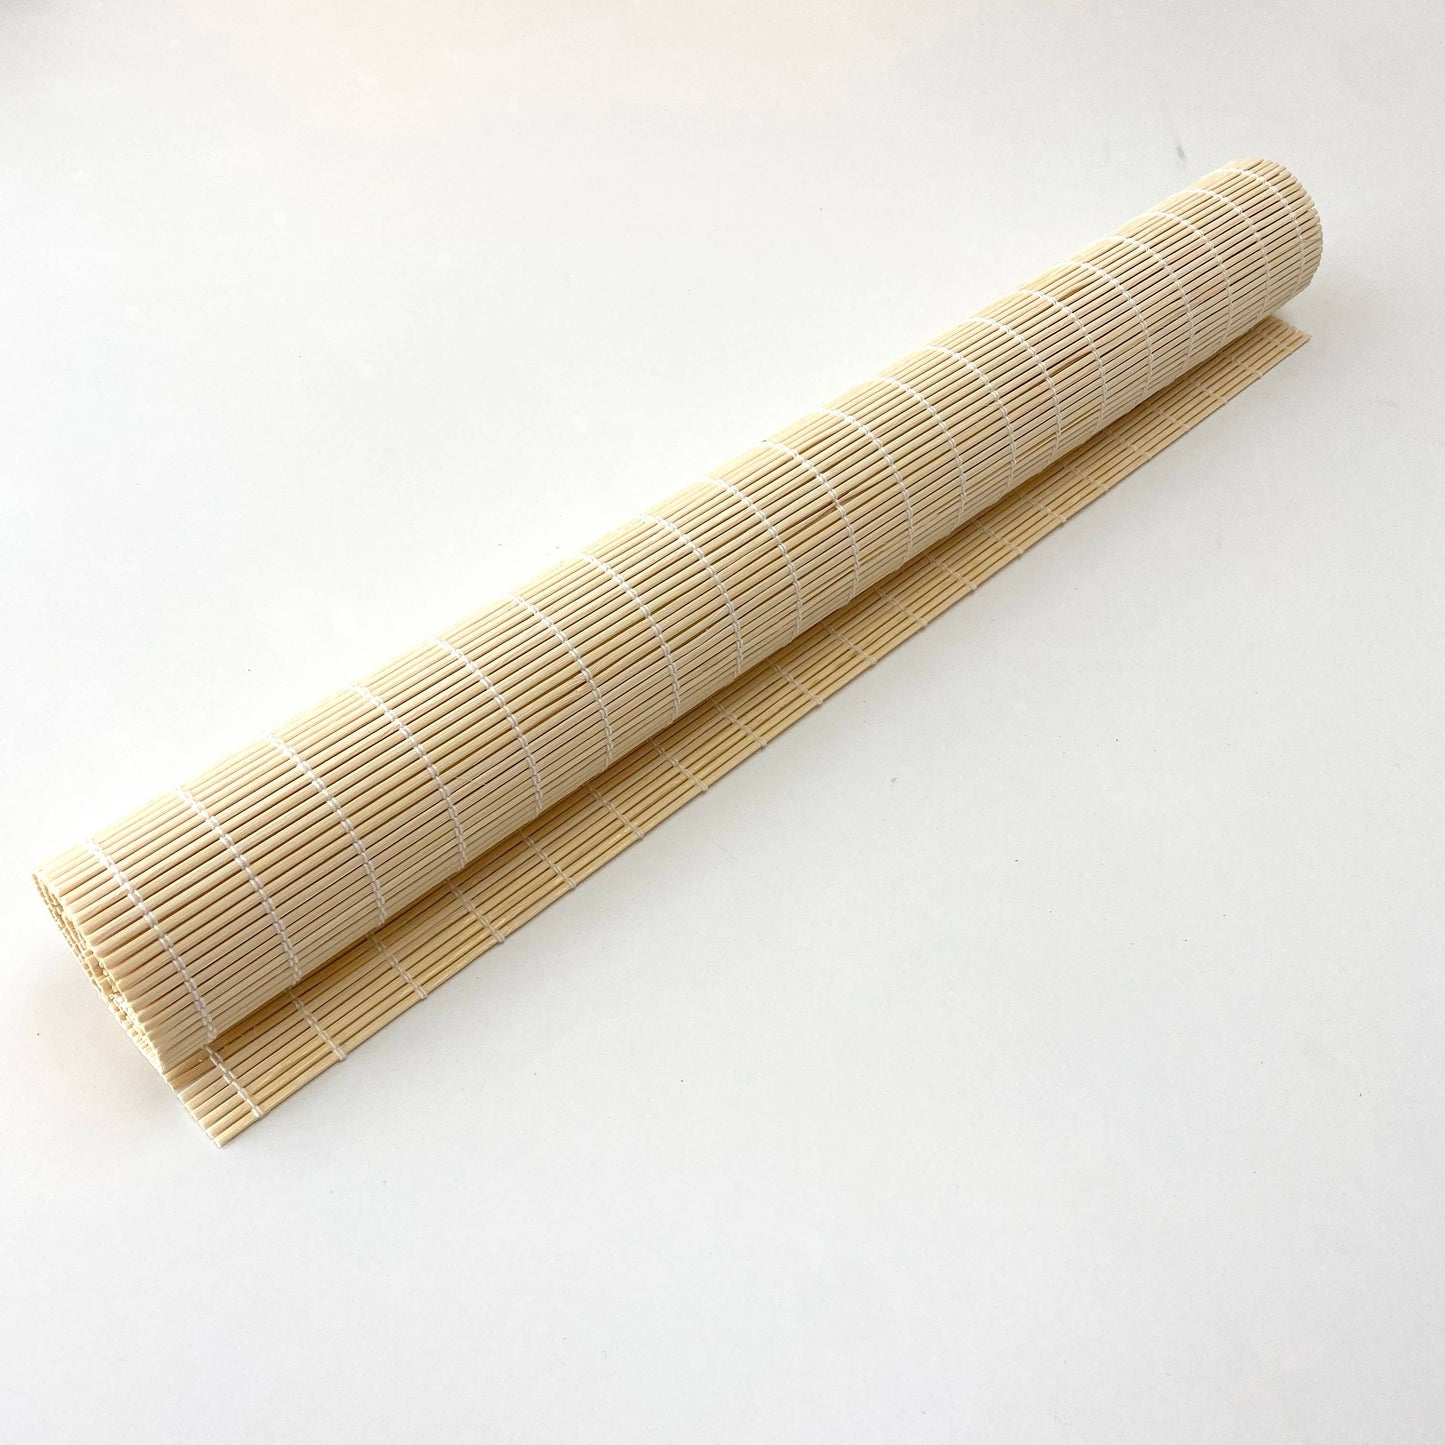 LARGE Bamboo Mat  & Netting for Wet Felting (70x24 inches)